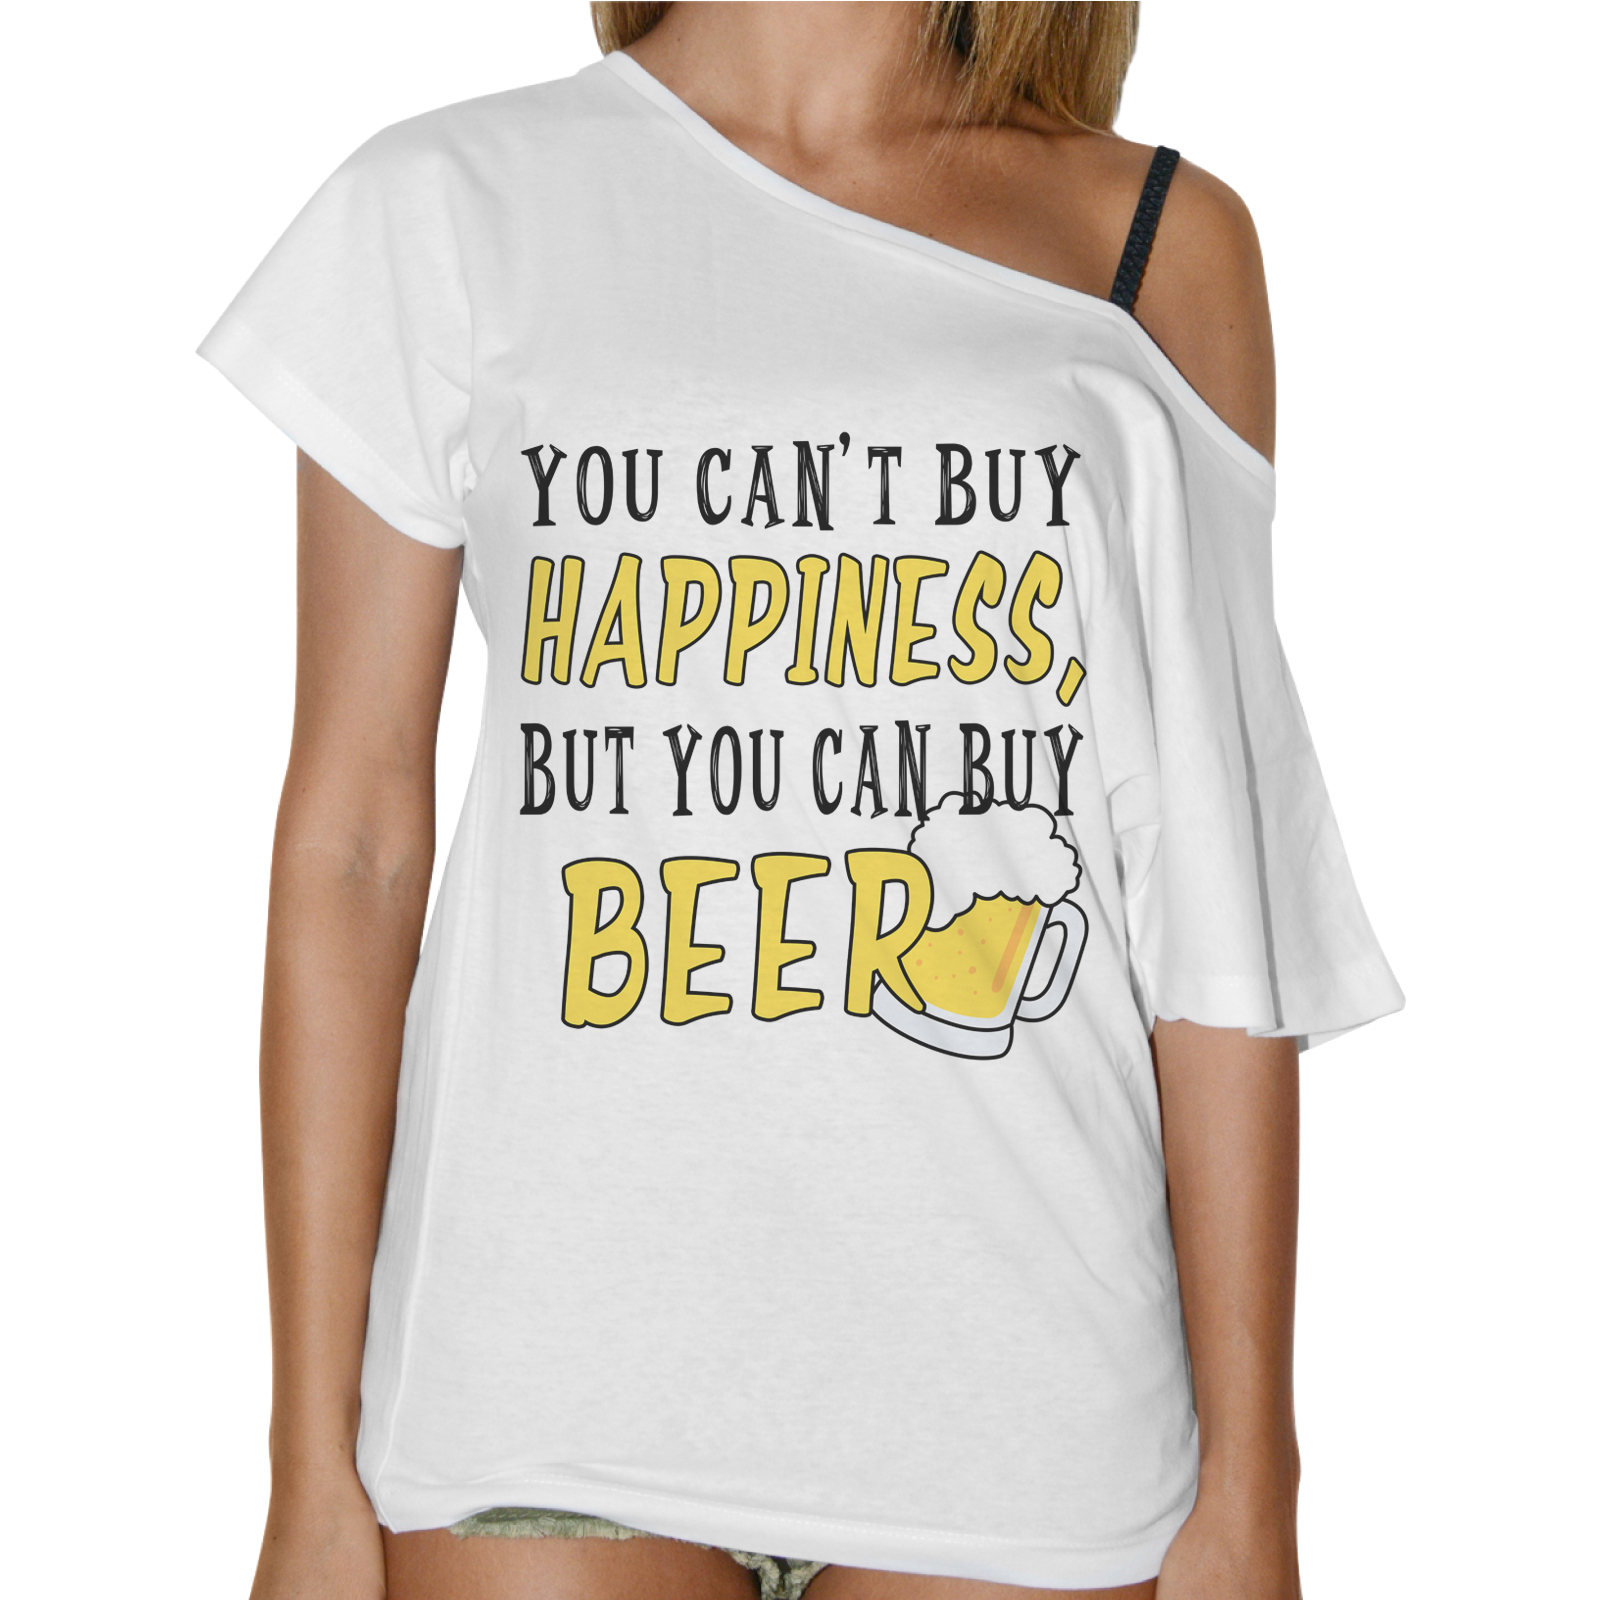 T-Shirt Donna Collo Barca YOU CAN BUY BEER